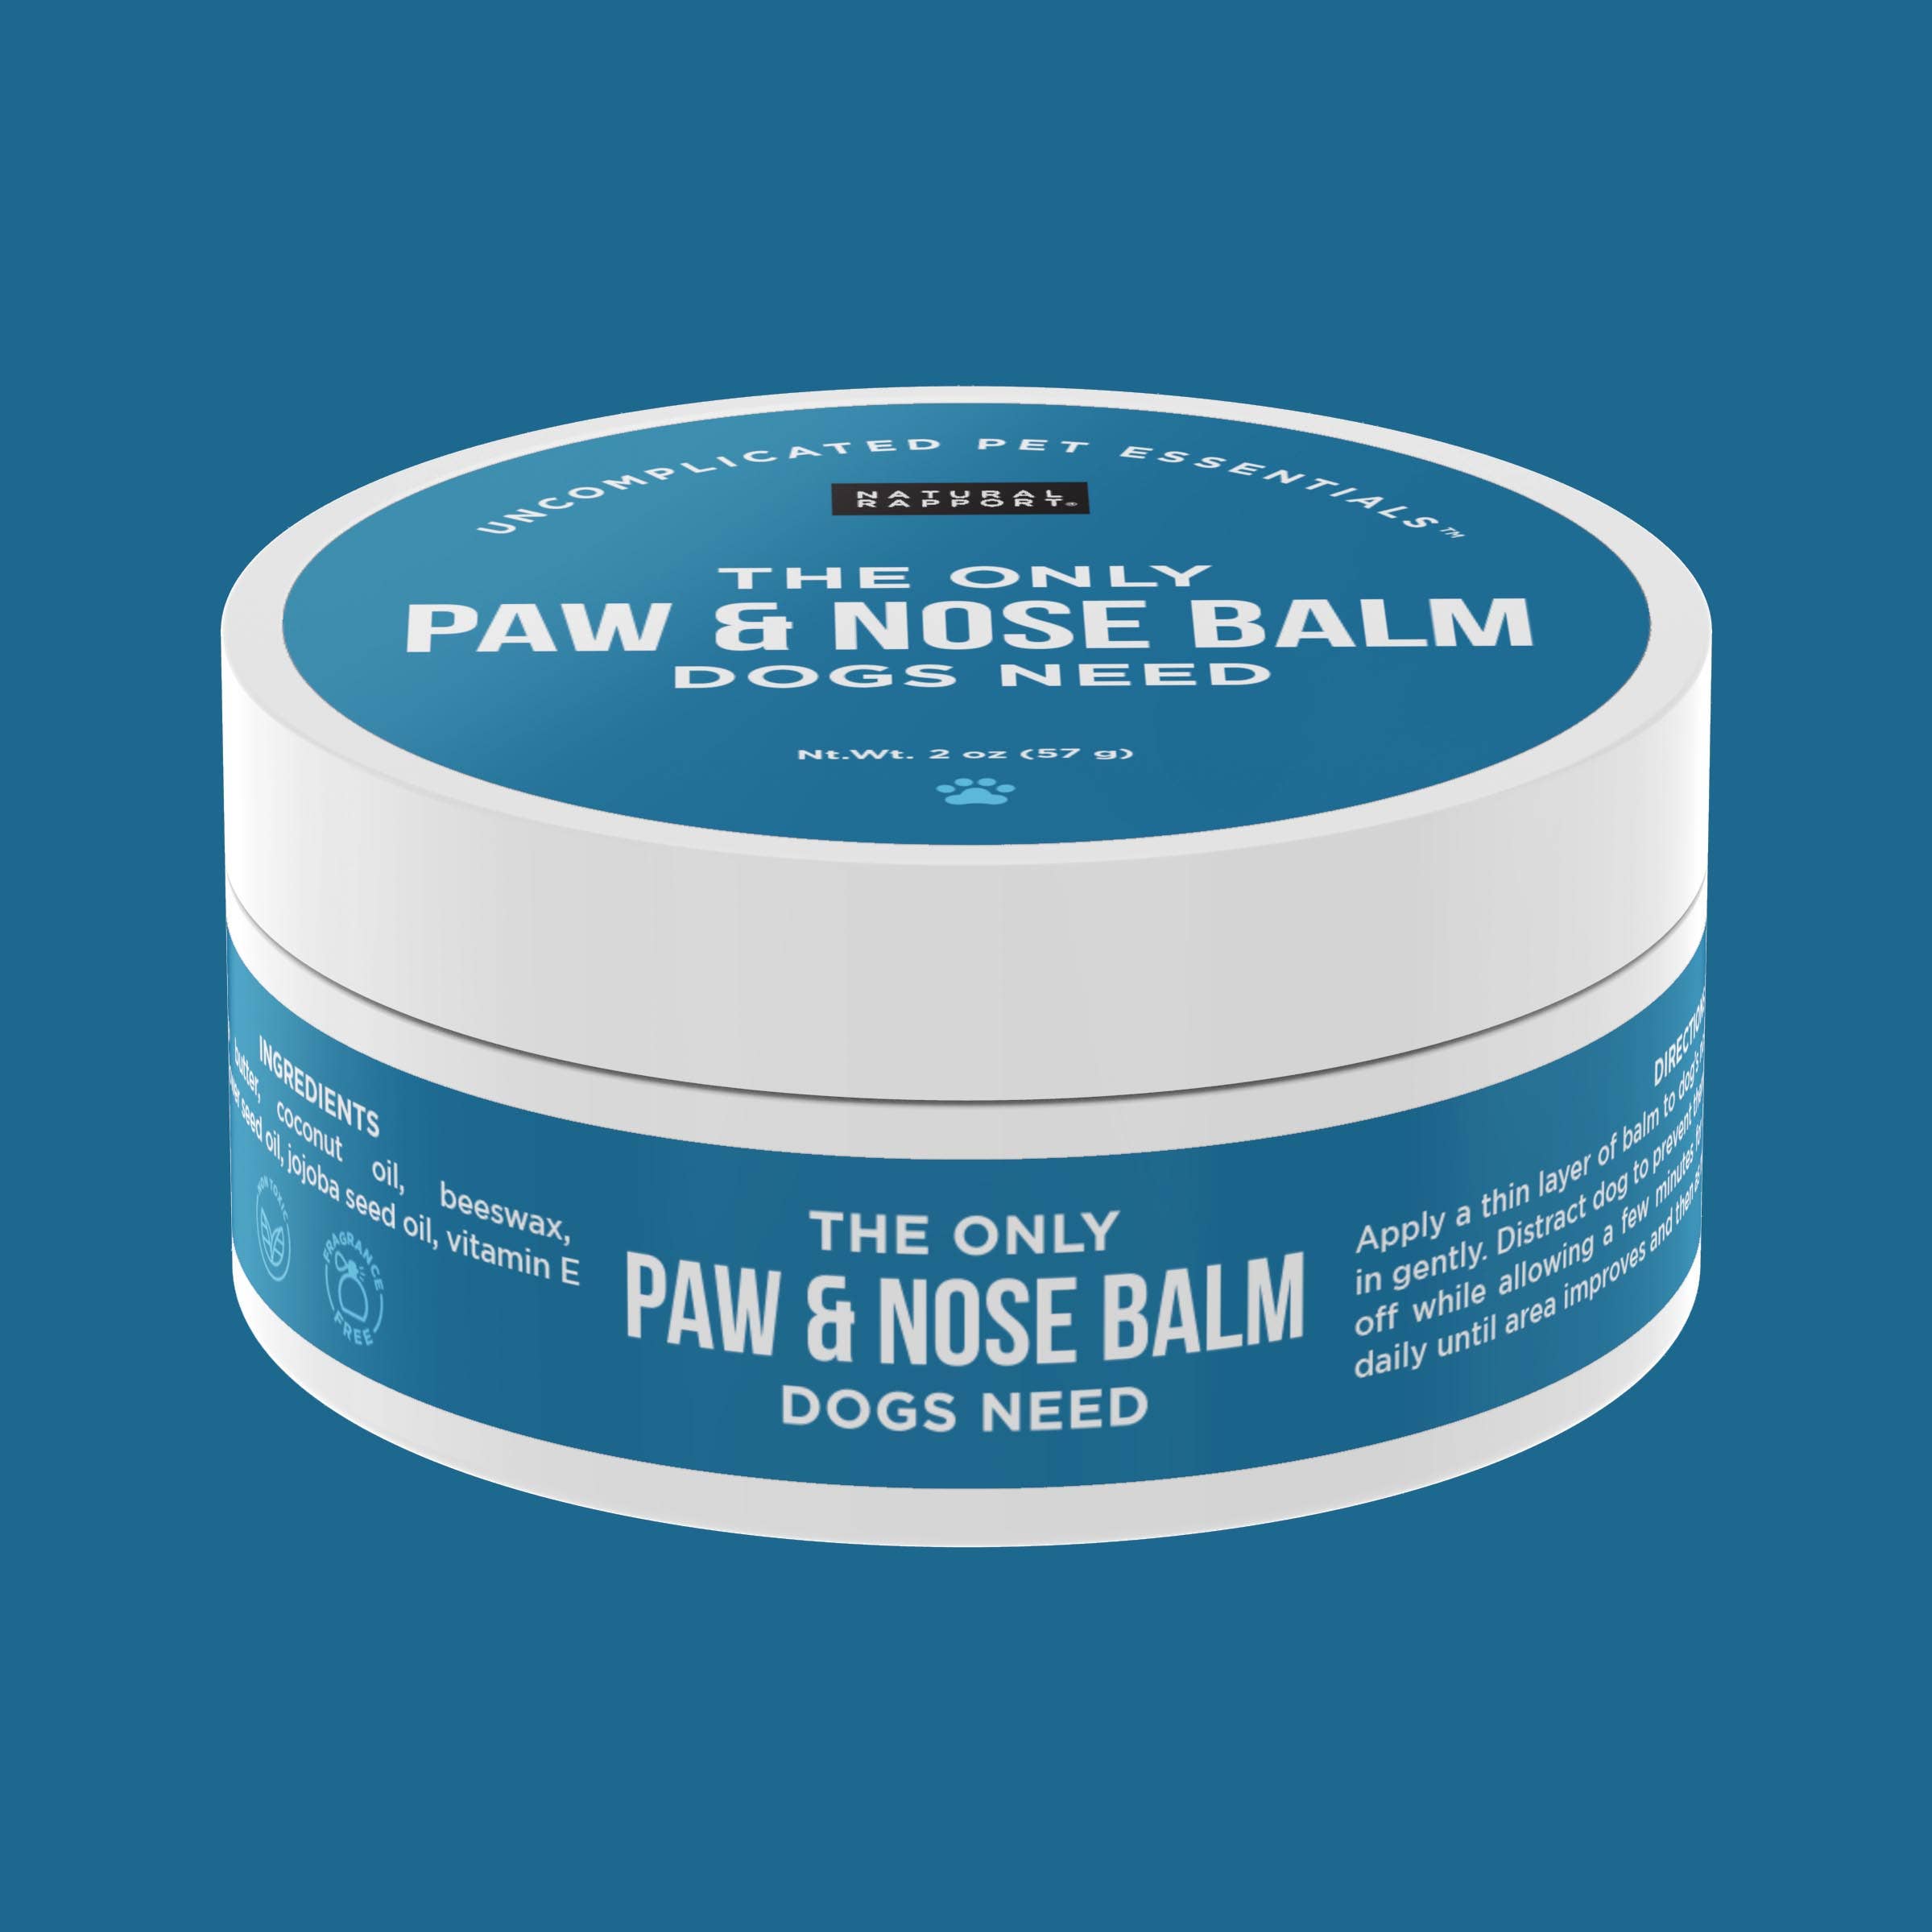 Natural Rapport - The Only Paw & Nose Balm Dogs Need